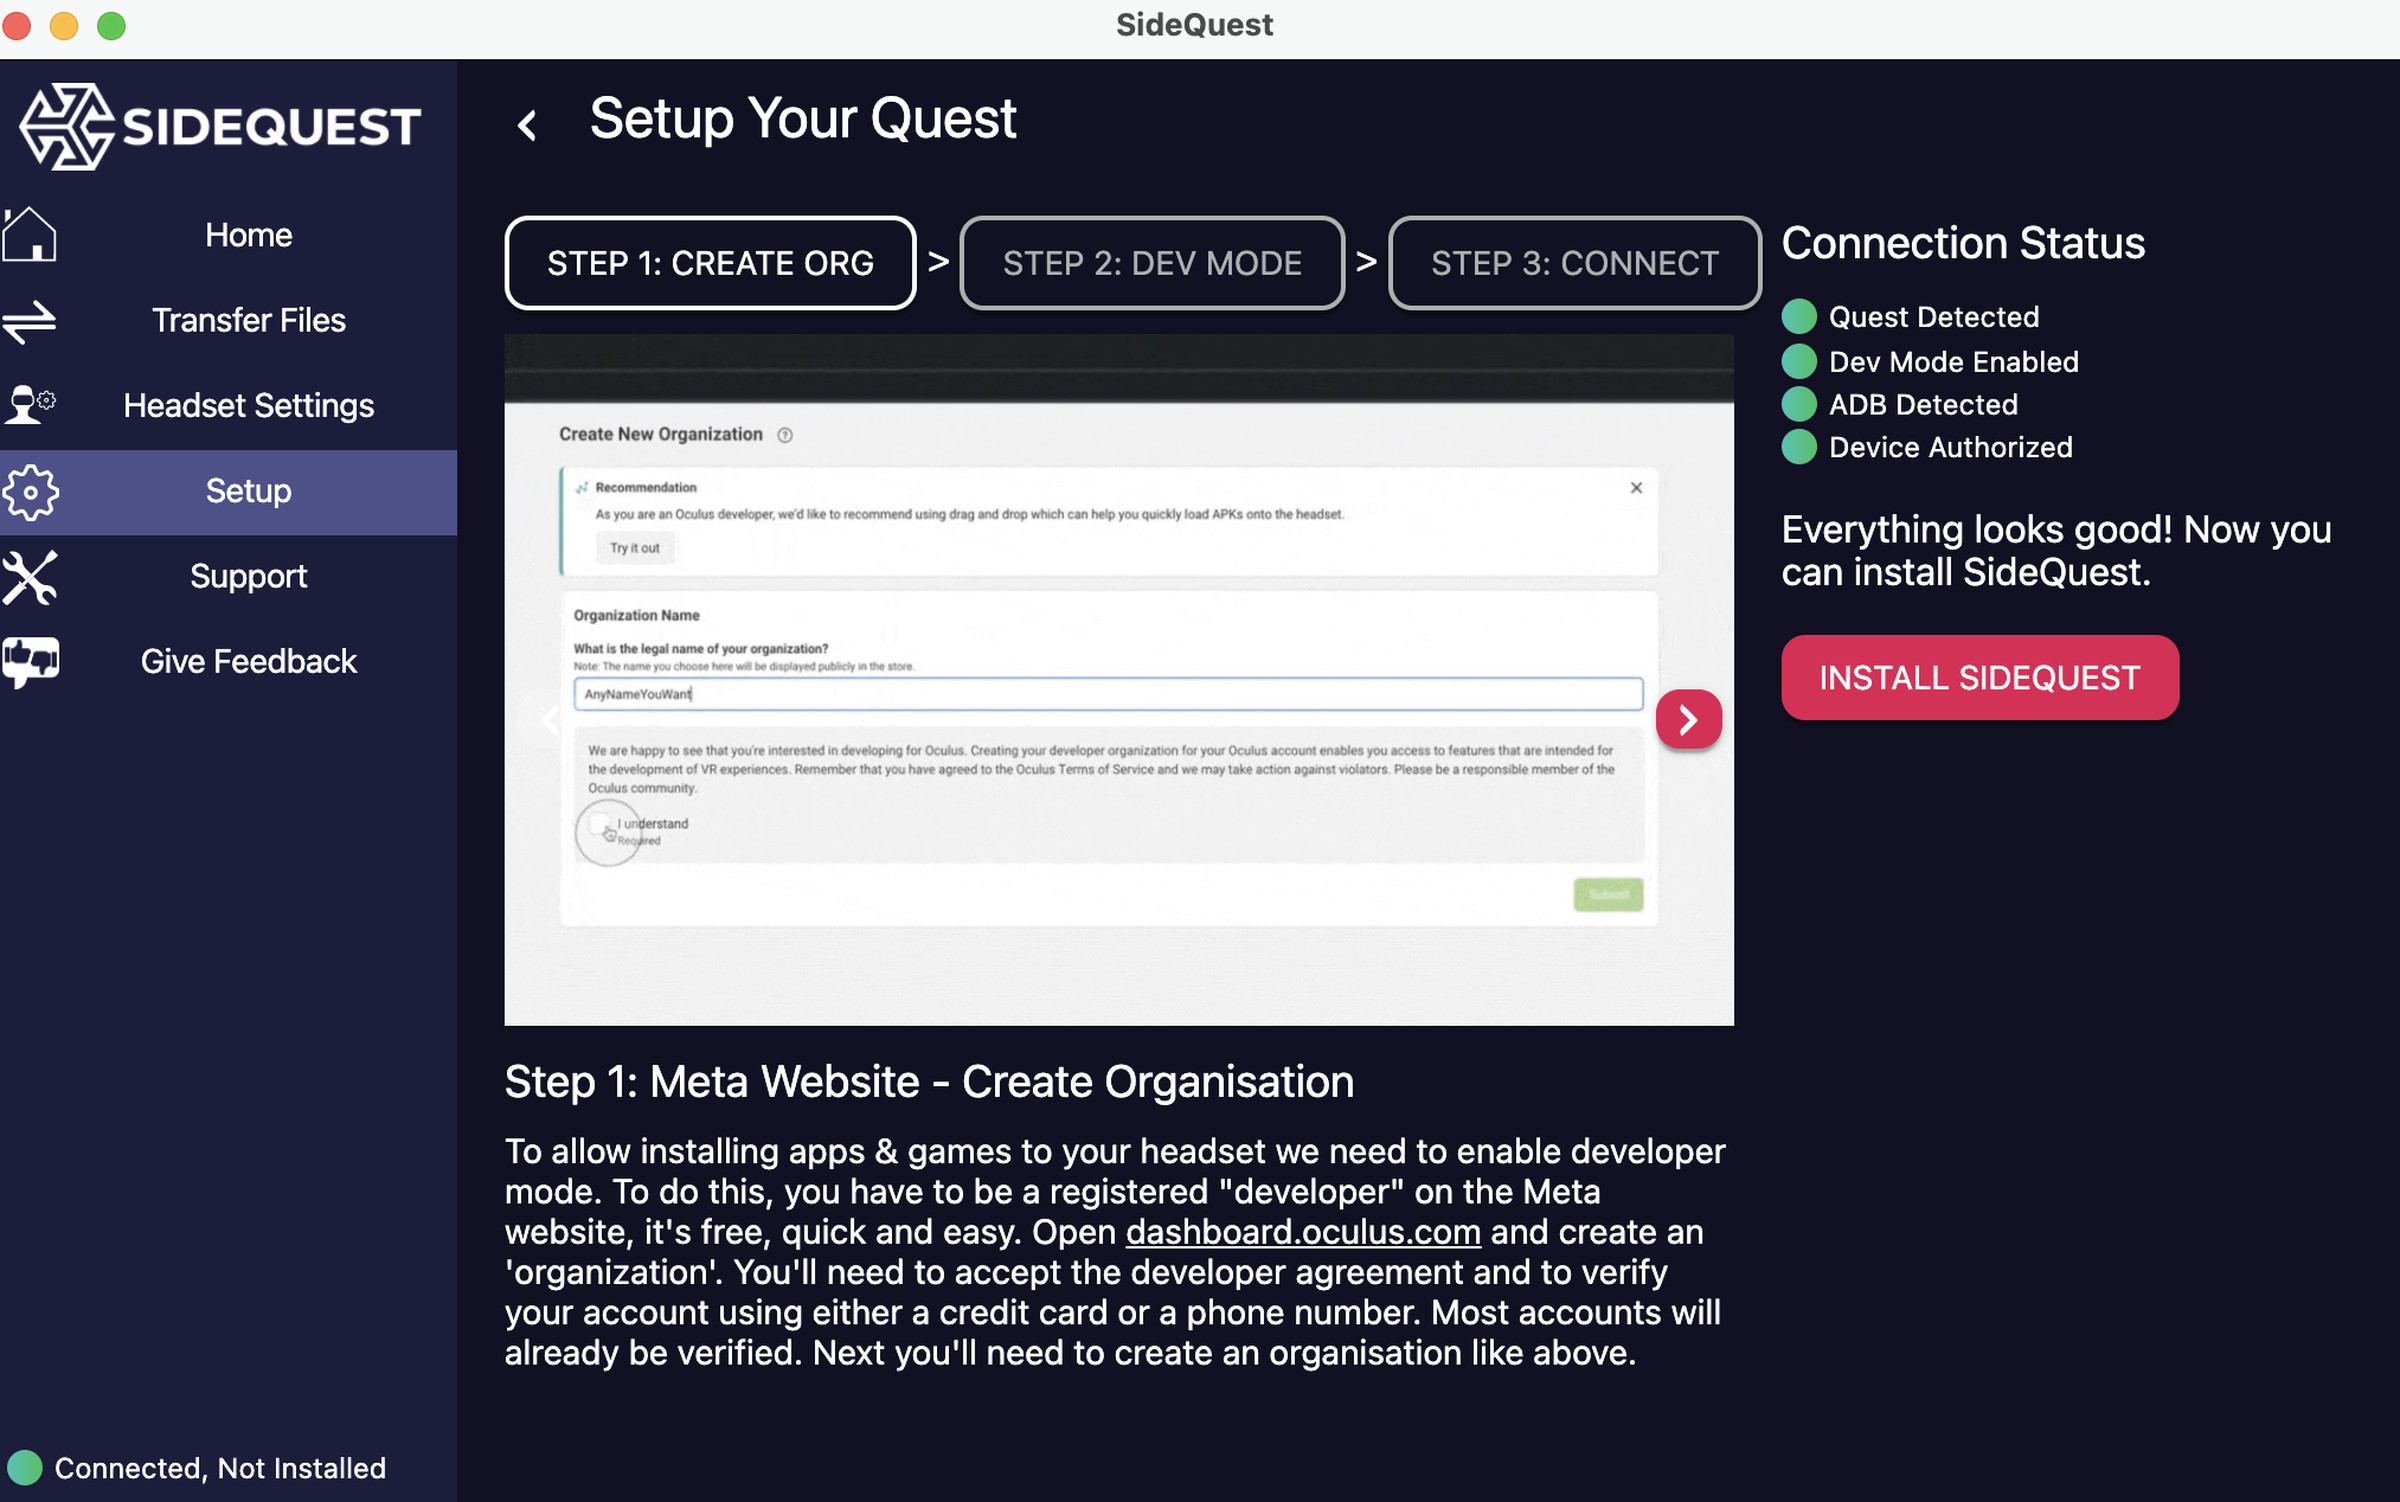 Screenshot of the SideQuest setup interface, with an Install SideQuest button.